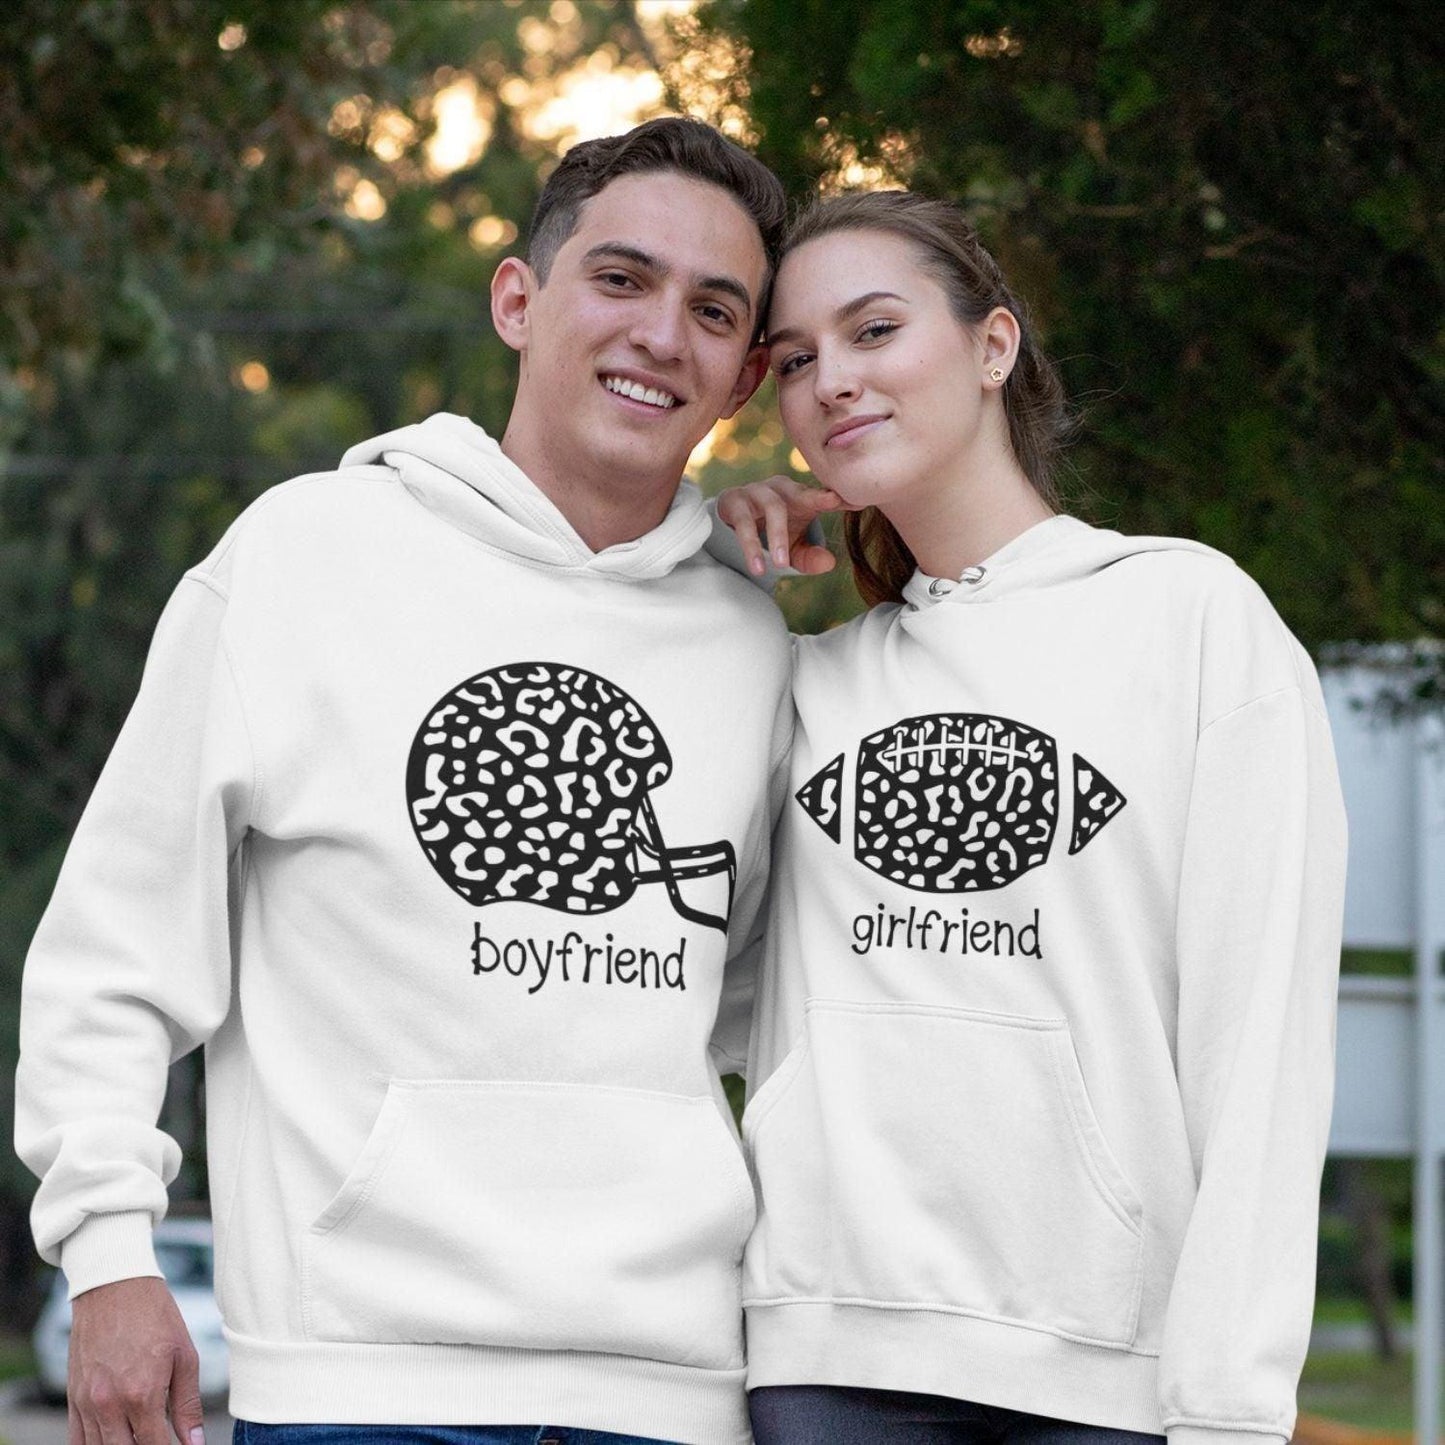 Football Lovers' Unisex Stylish Matching Set - Perfect for Couples - 4Lovebirds